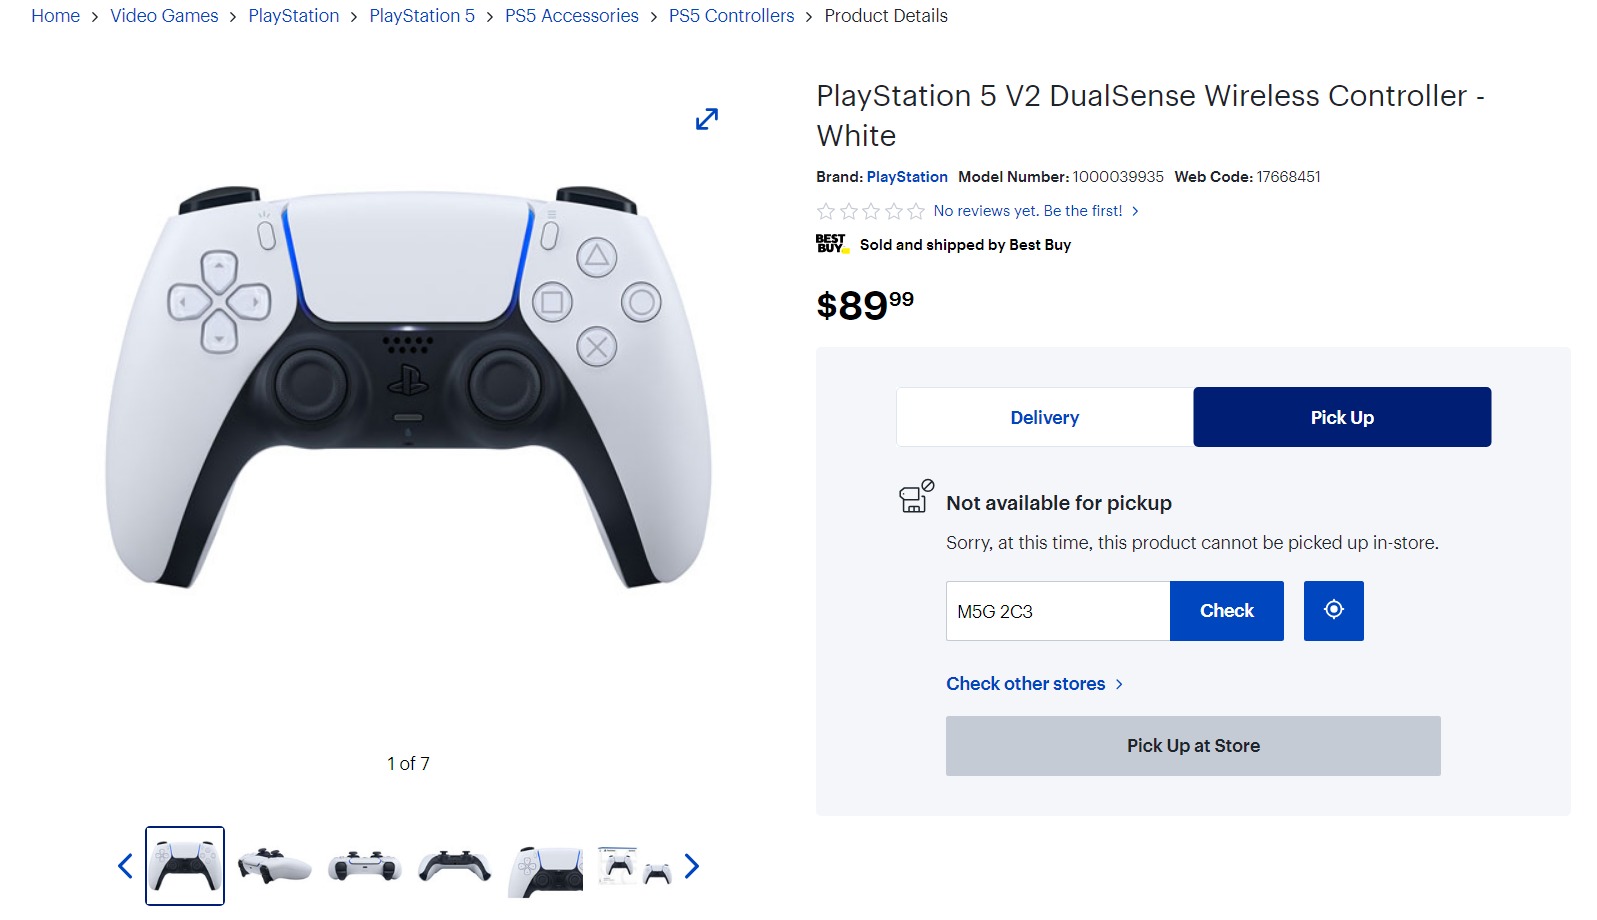 PlayStation 5 V2 DualSense Wireless Controller leaked by a Best Buy listing.